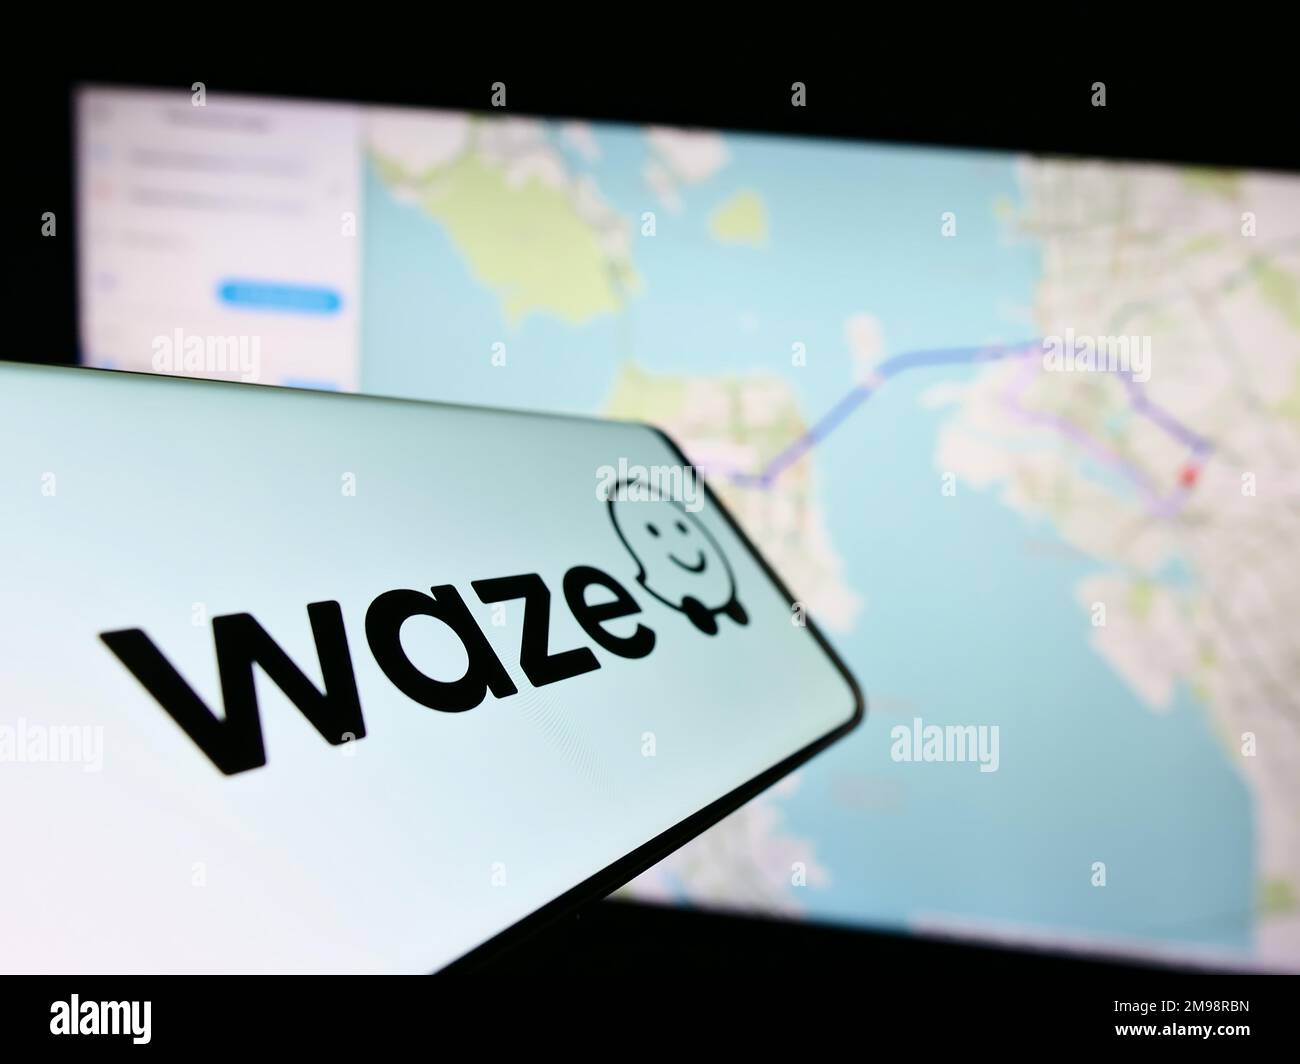 Cellphone with logo of Israeli navigation company Waze Mobile Ltd. on screen in front of business website. Focus on center-right of phone display. Stock Photo